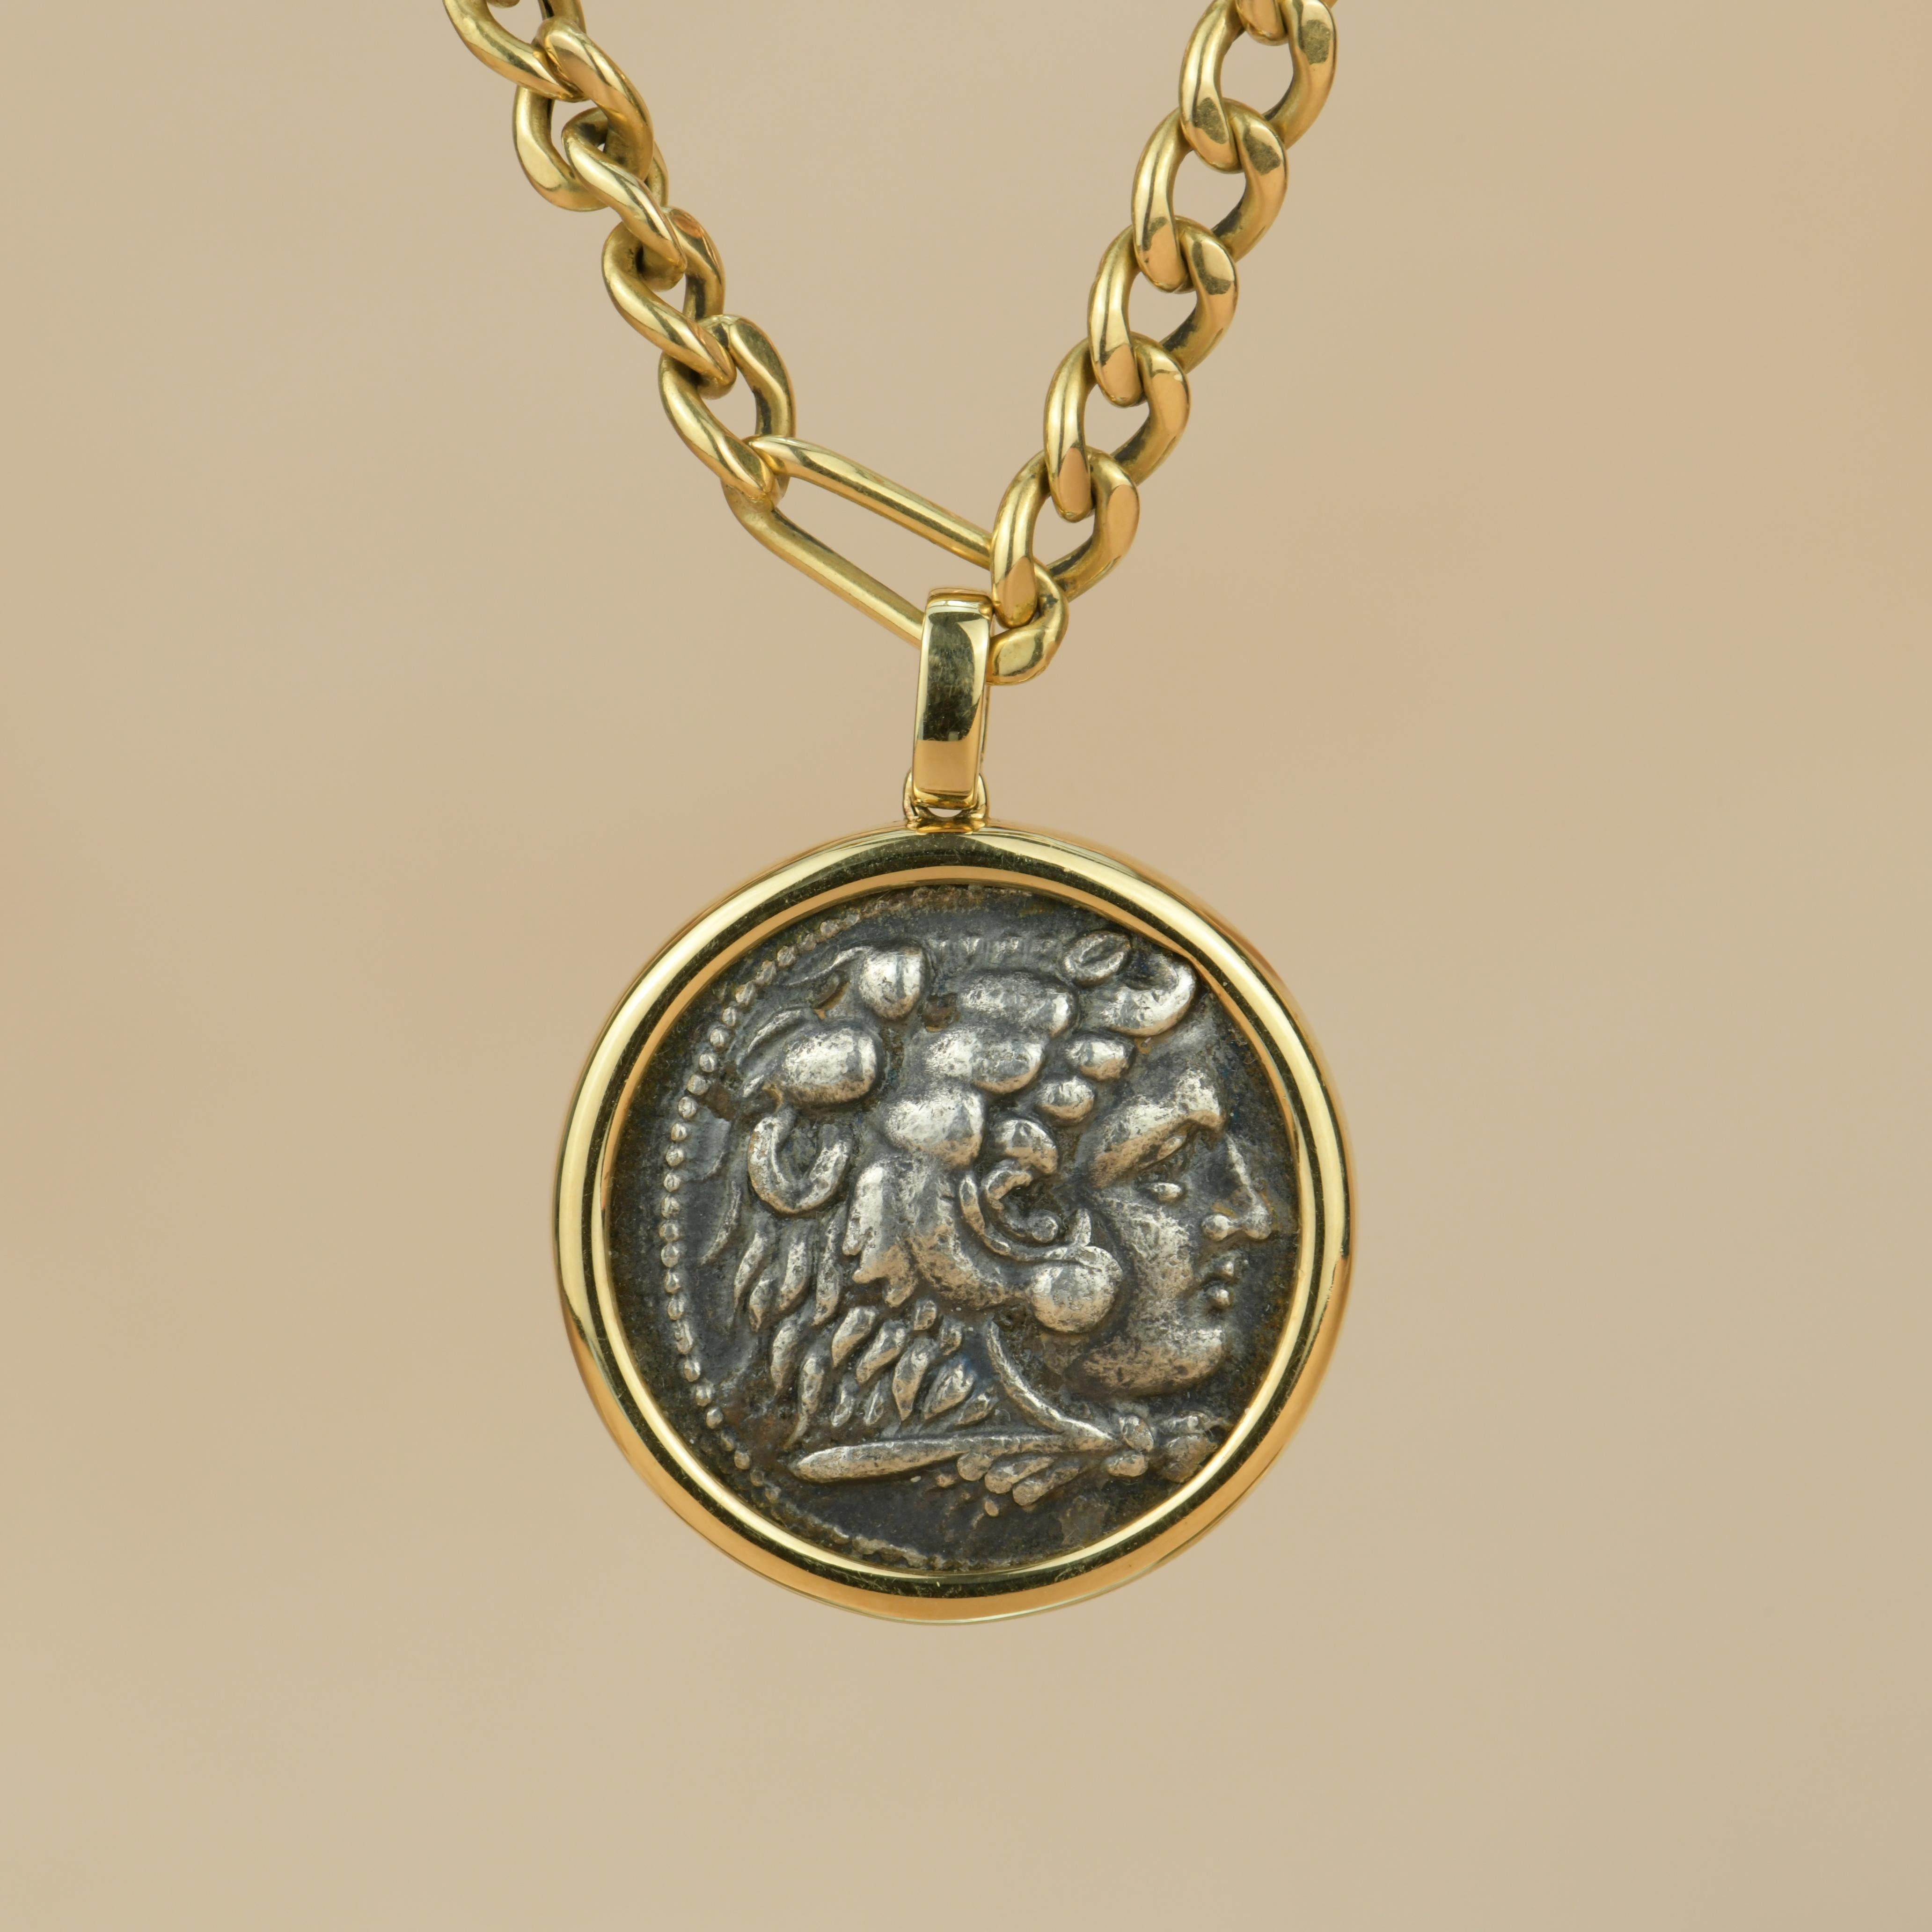 This big ancient coin was issued by Amphipolis Mint dates in 336-323 B.C. in an excellent condition. 

The chain is made in  18k yellow gold. 

This gorgeous necklace is perfect for everyday wear and will always be a timeless and wearable work of